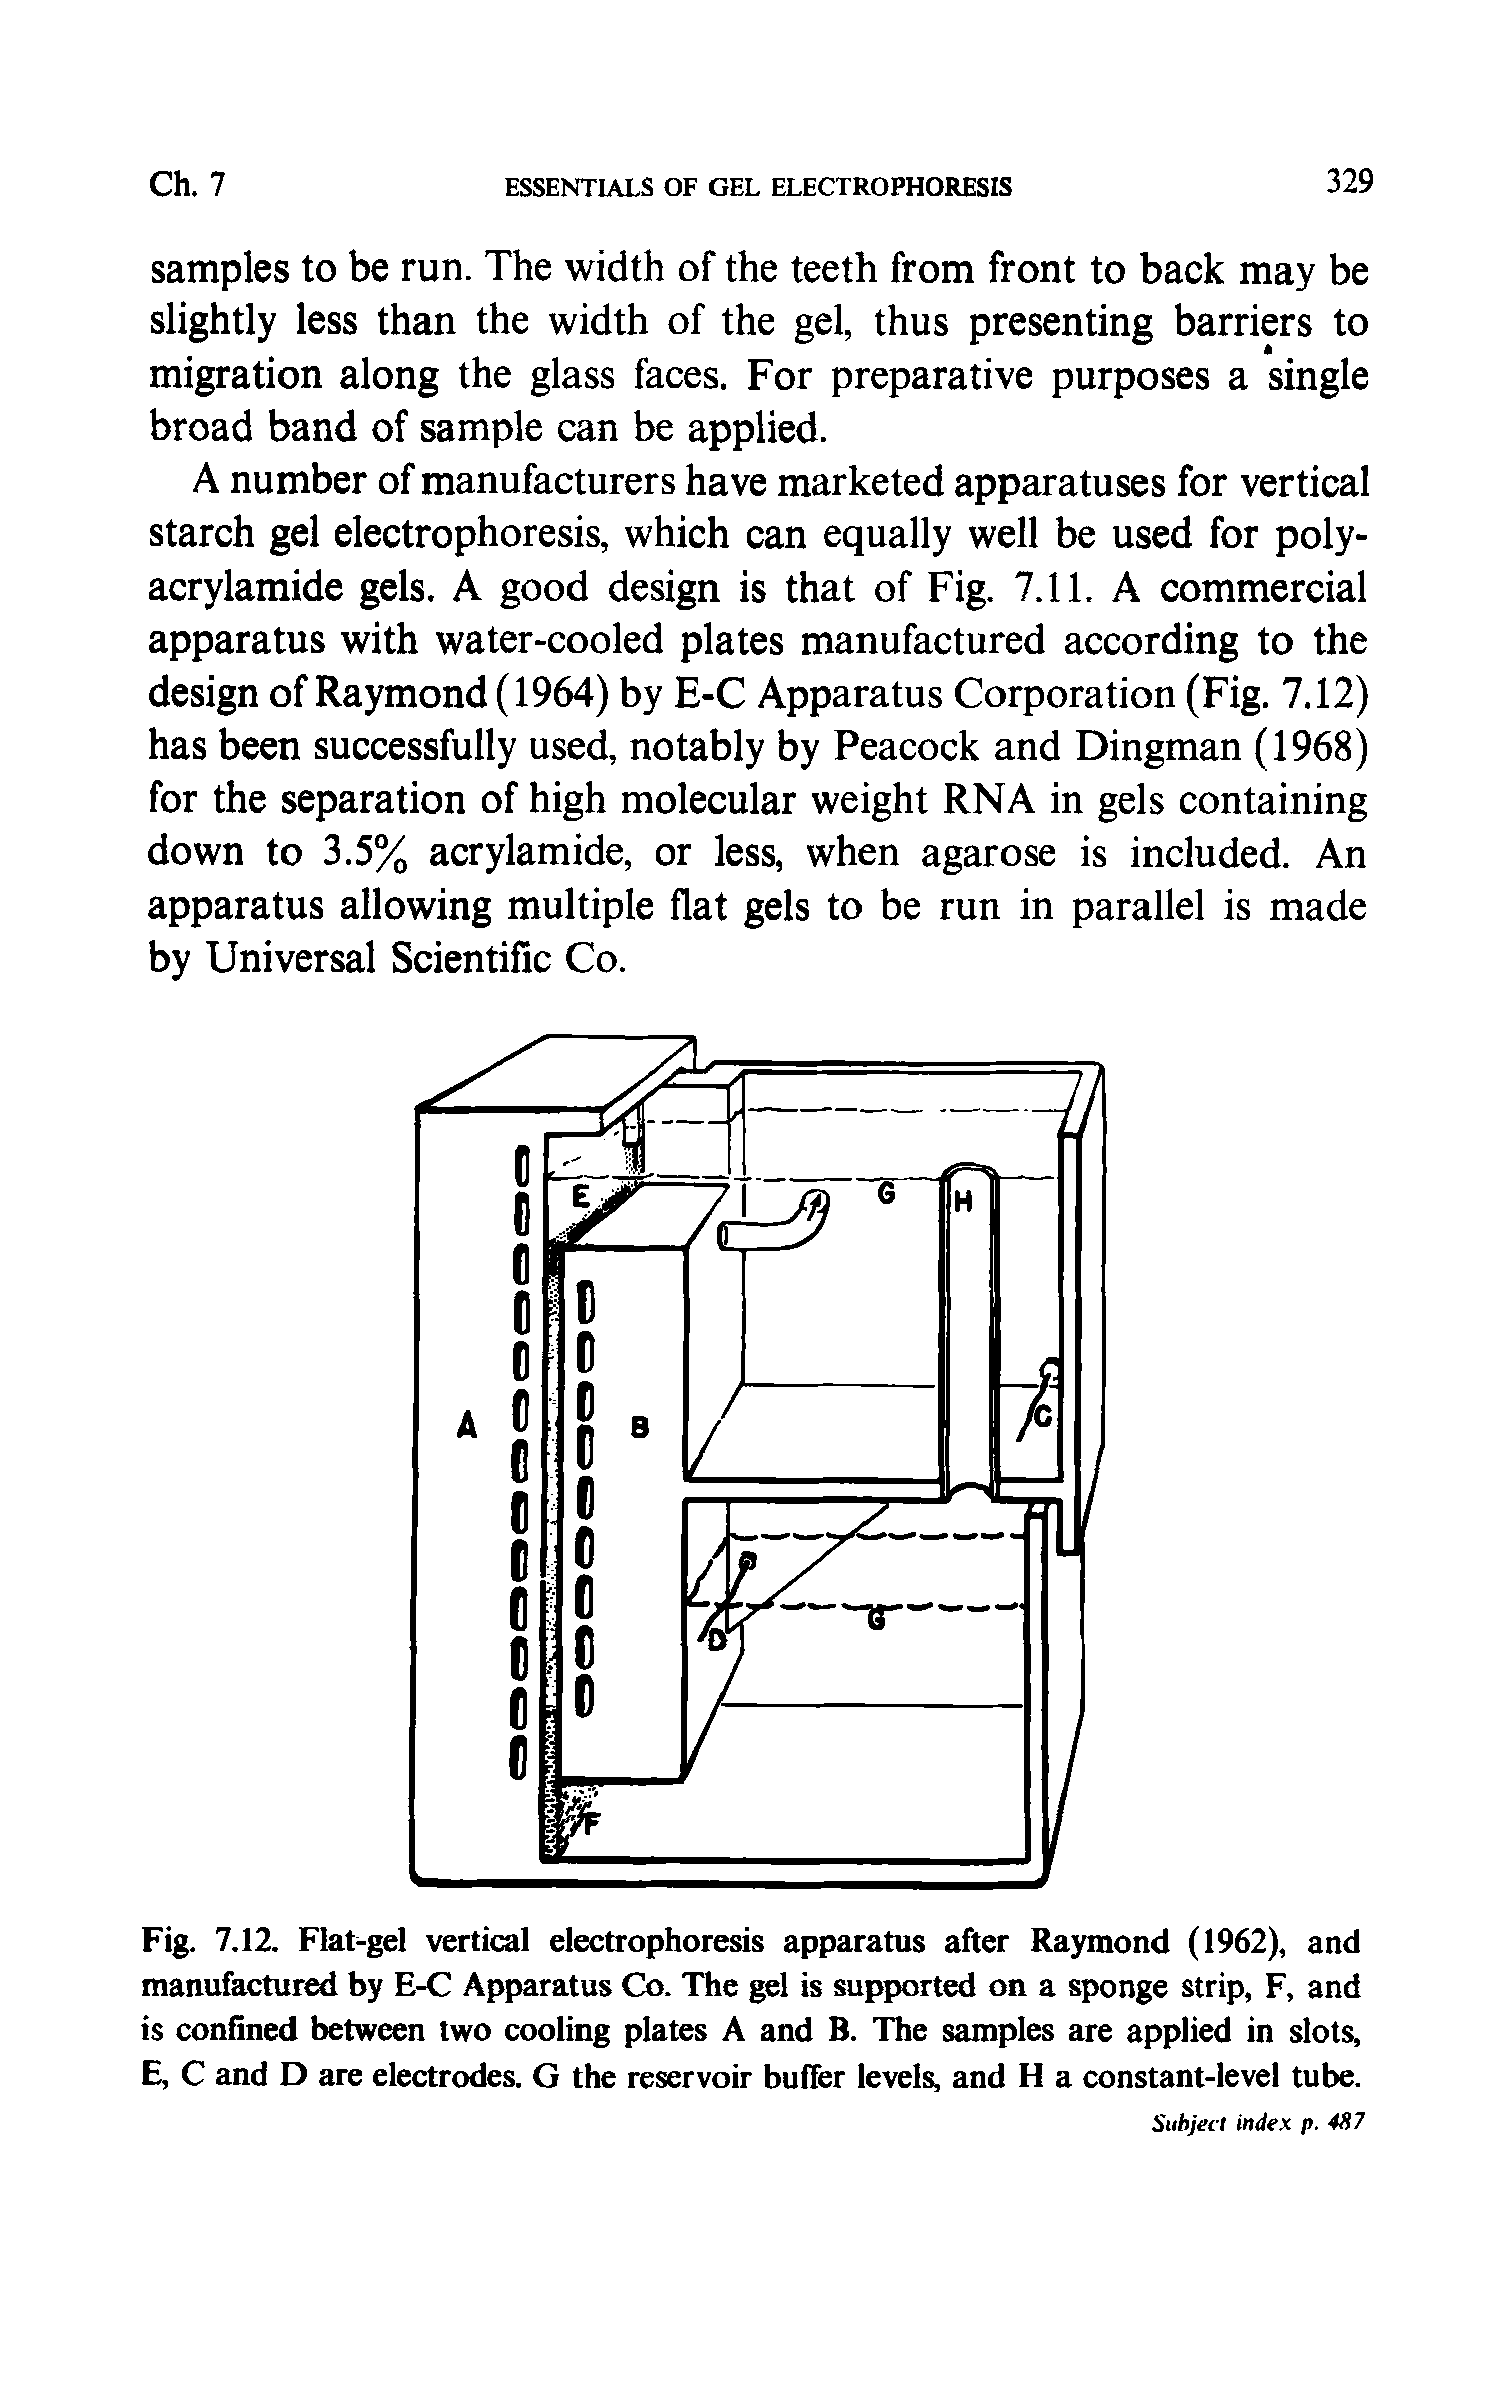 Fig. 7.12. Flat-gel vertical electrophoresis apparatus after Raymond (1962), and manufactured by E-C Apparatus Co. The gel is supported on a sponge strip, F, and is confined between two cooling plates A and B. The samples are applied in slots, E, C and D are electrodes. G the reservoir buffer levels, and H a constant-level tube.